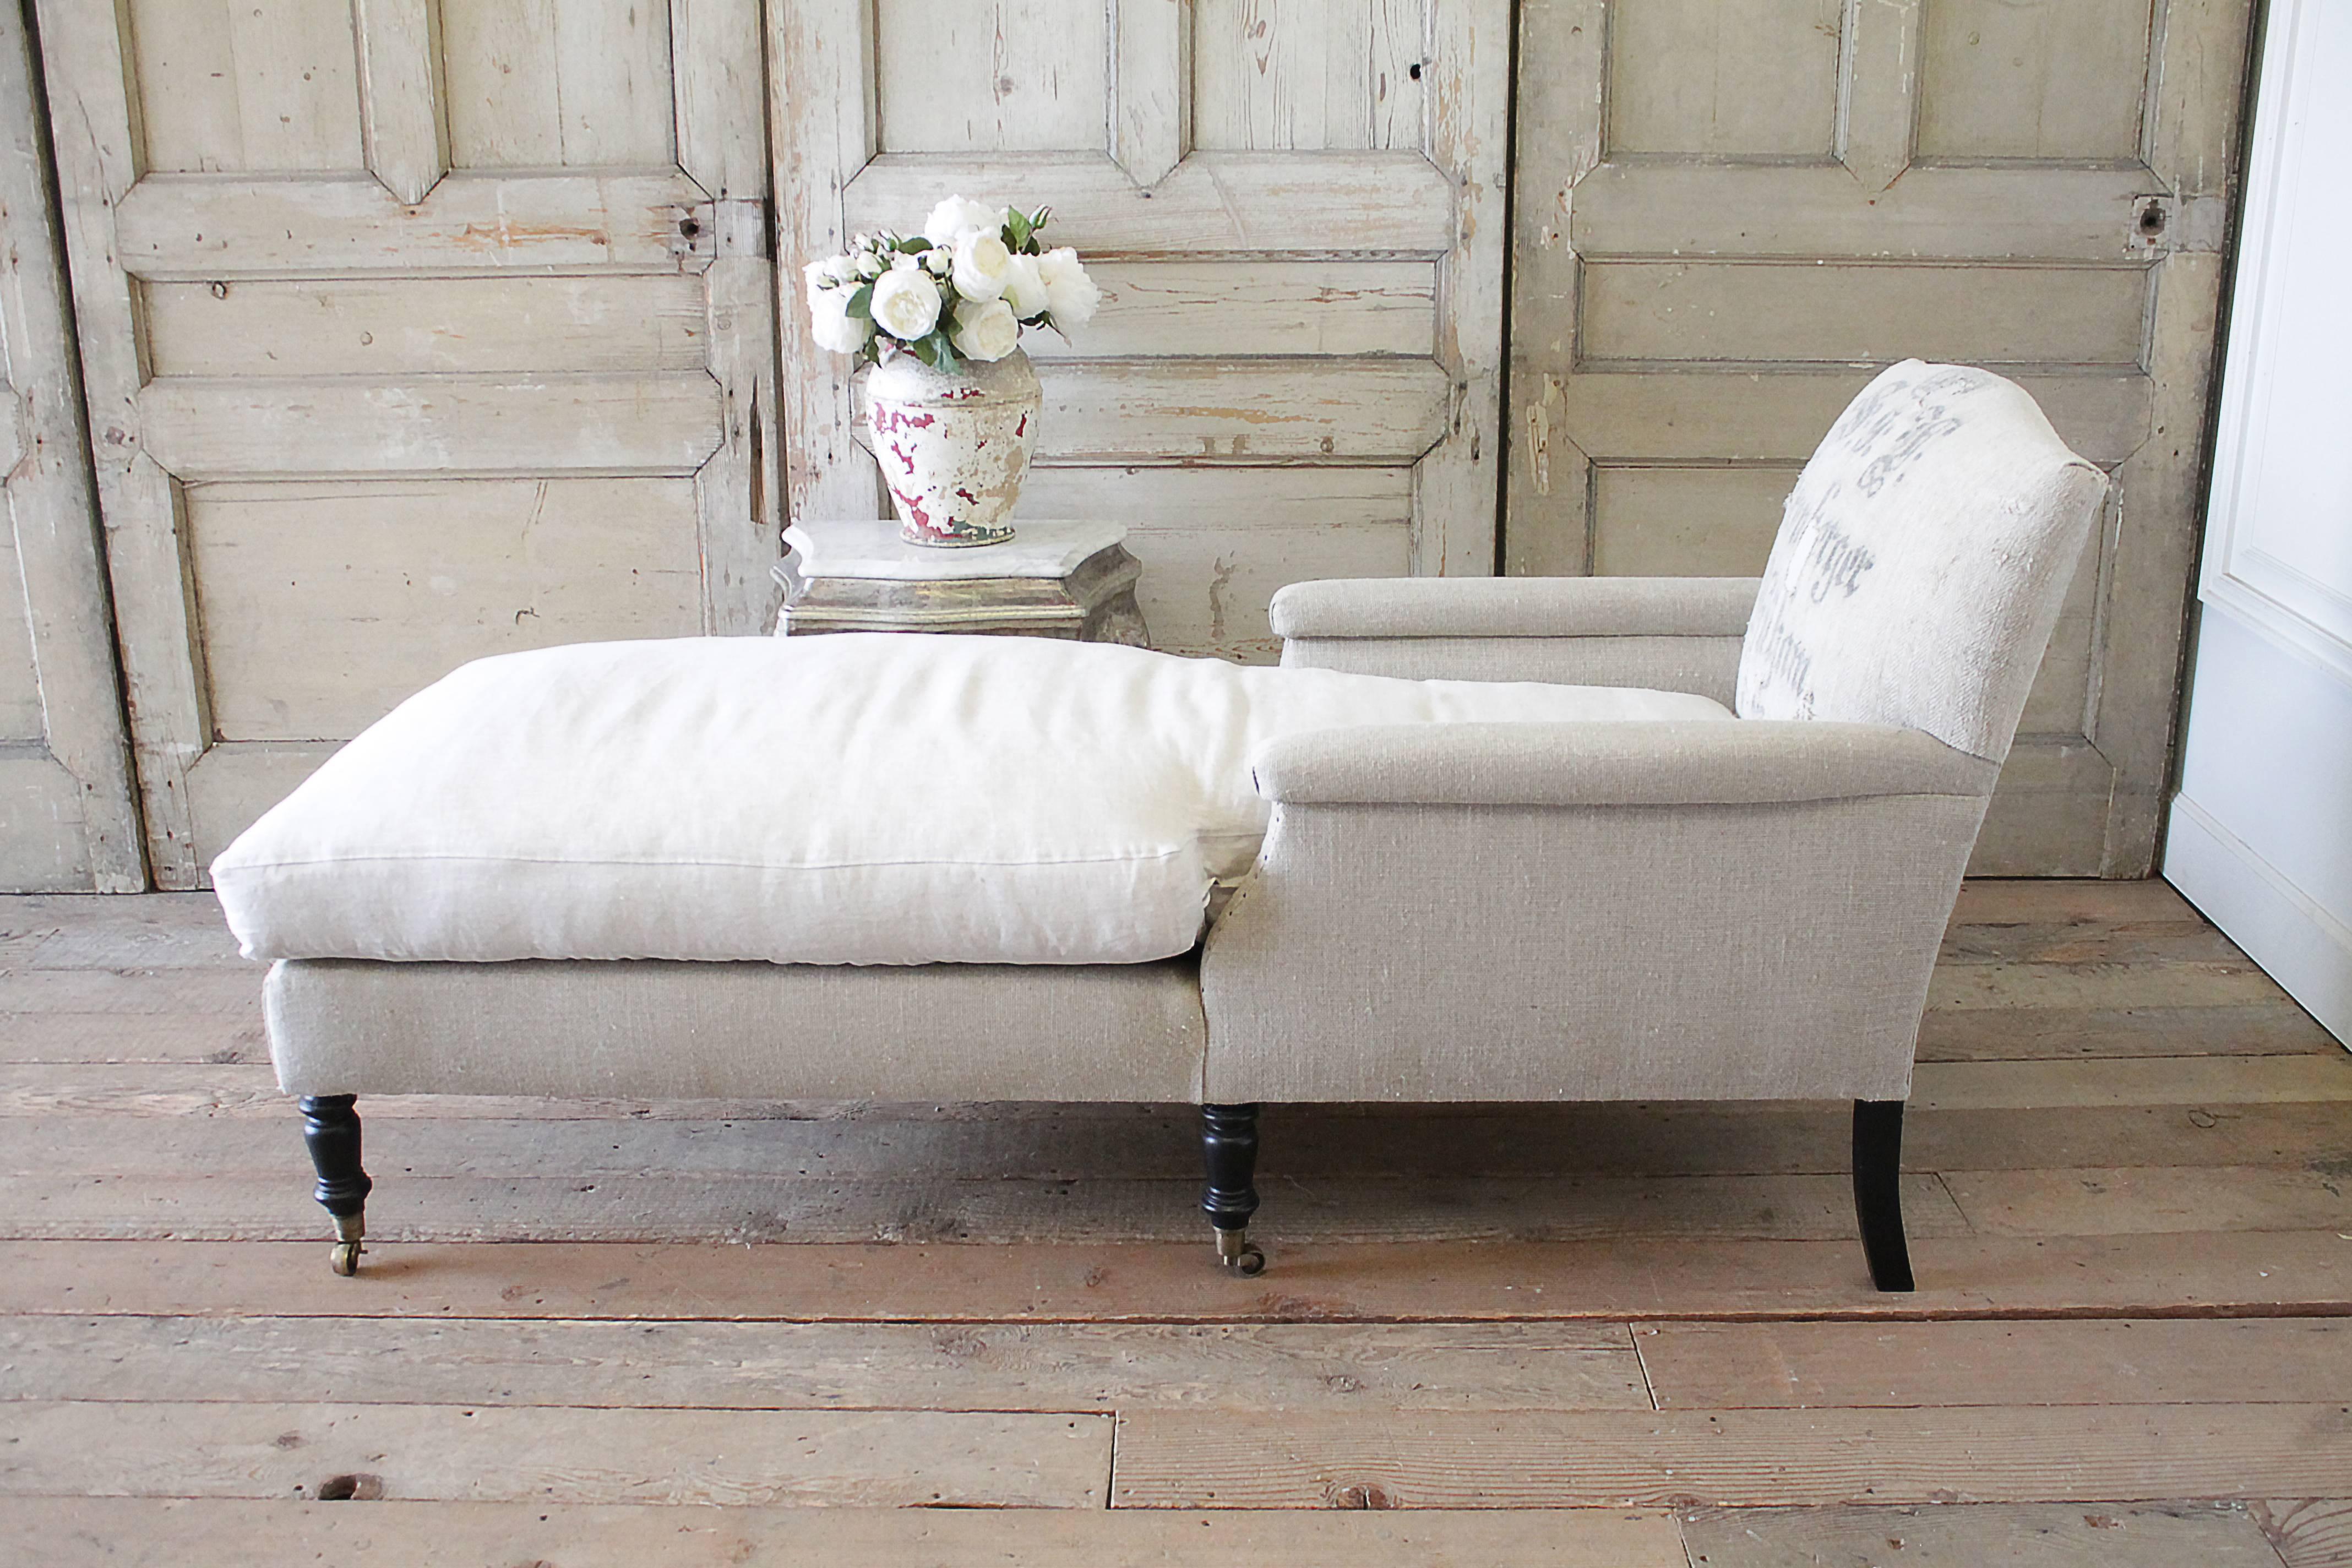 Rustic Antique Style Chaise Longue with Antique German Feed Sack Upholstery For Sale